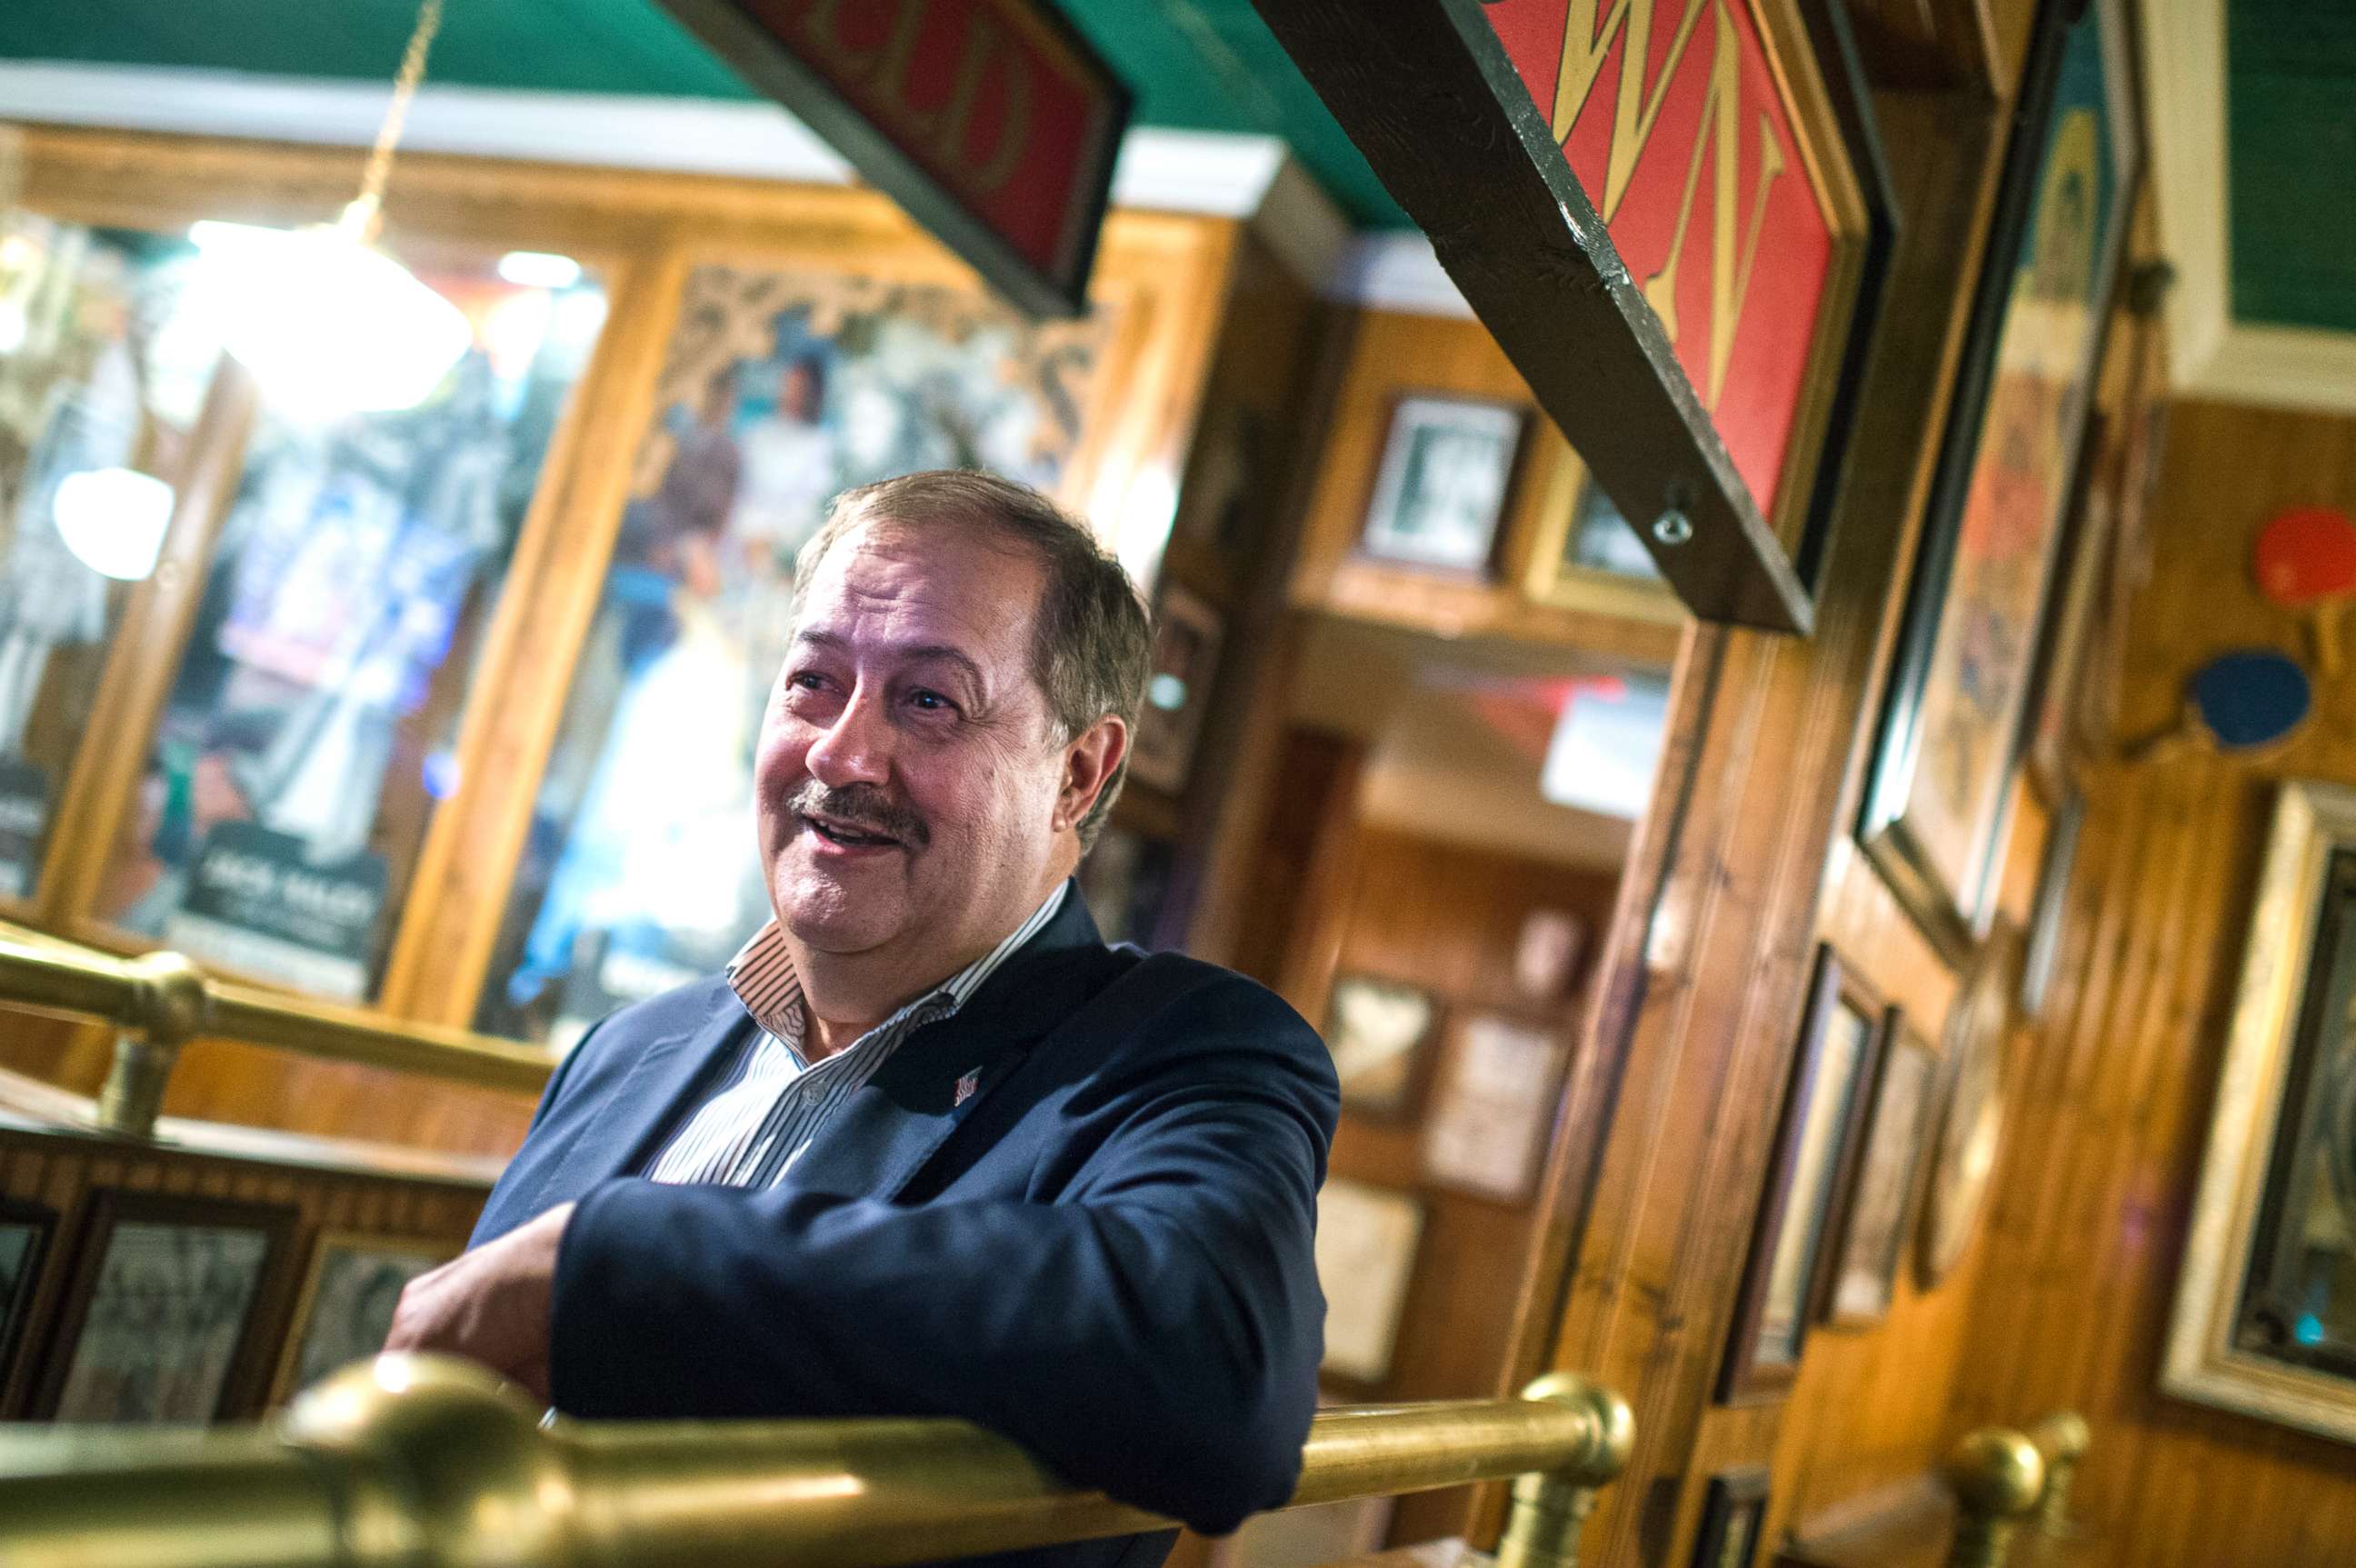 PHOTO: Don Blankenship, who is running for the Republican nomination for Senate in West Virginia, attends a town hall meeting at Macado's restaurant in Bluefield, W.Va., May 3, 2018. 